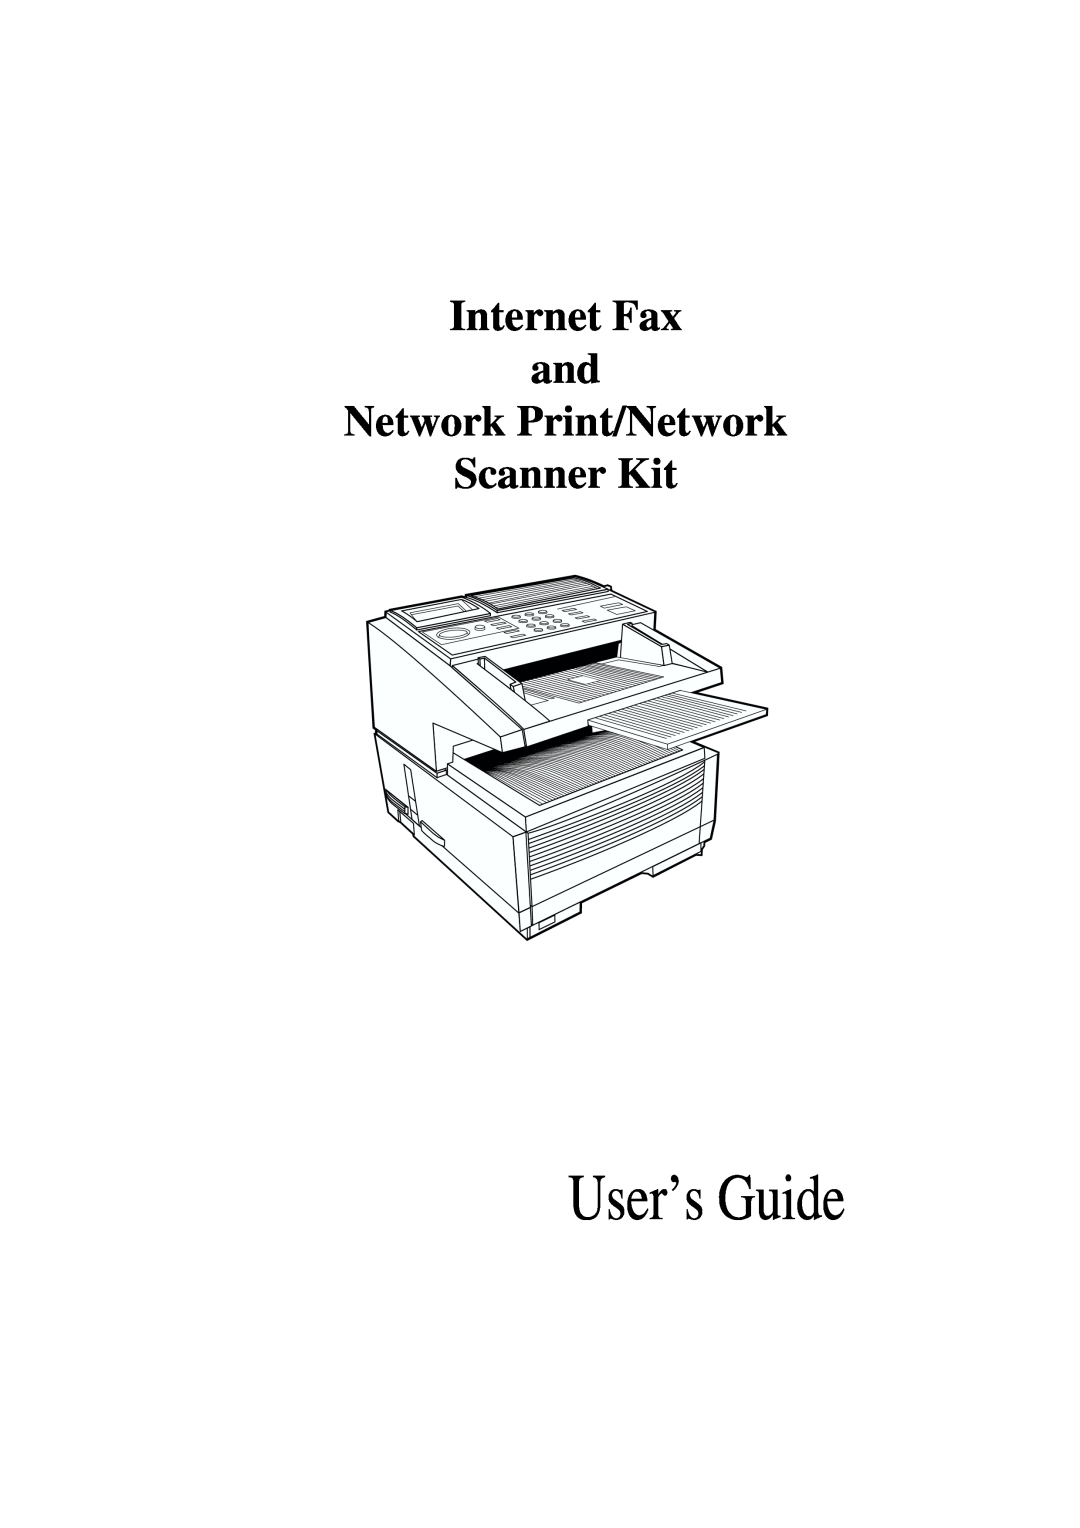 Oki ii manual User’s Guide, Internet Fax and Network Print/Network, Scanner Kit 